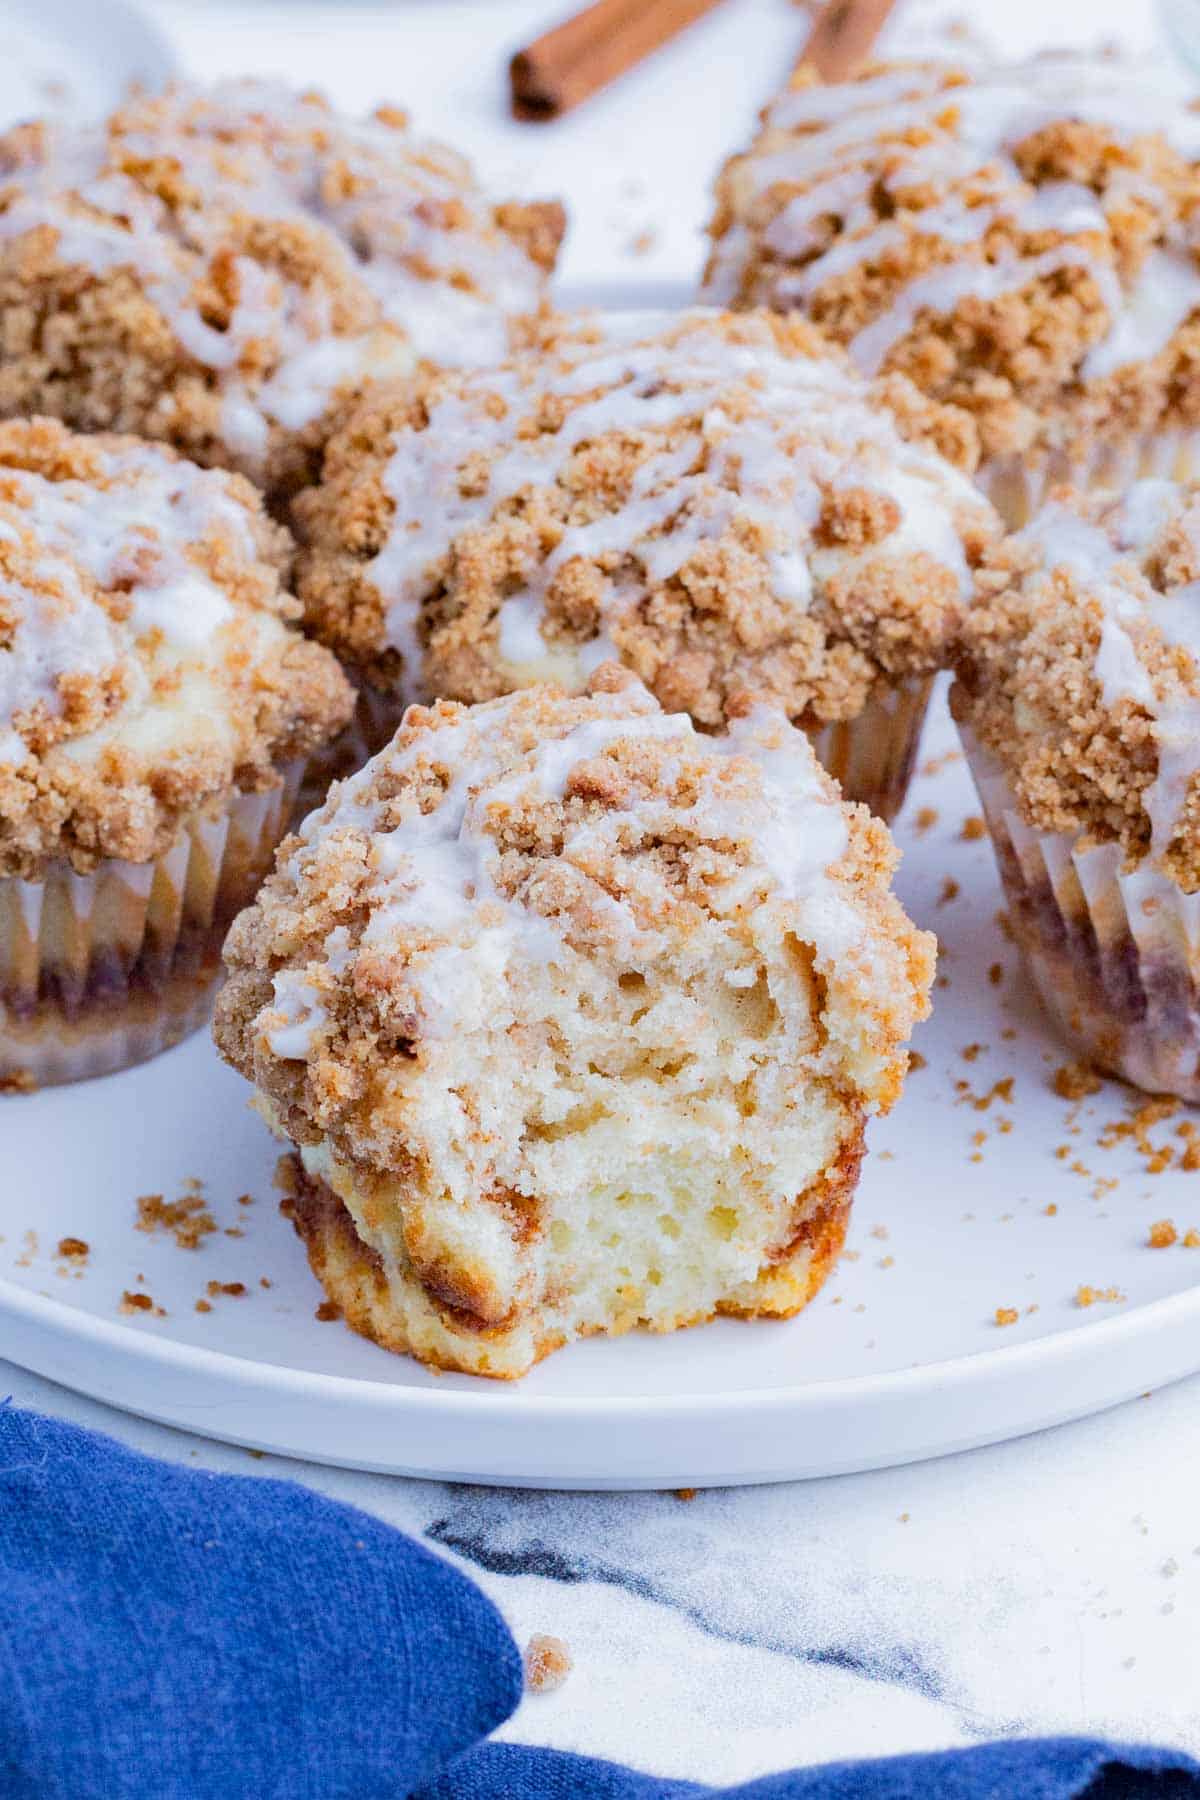 Coffee cake cupcakes are topped with cinnamon streusel and a sweet glaze.